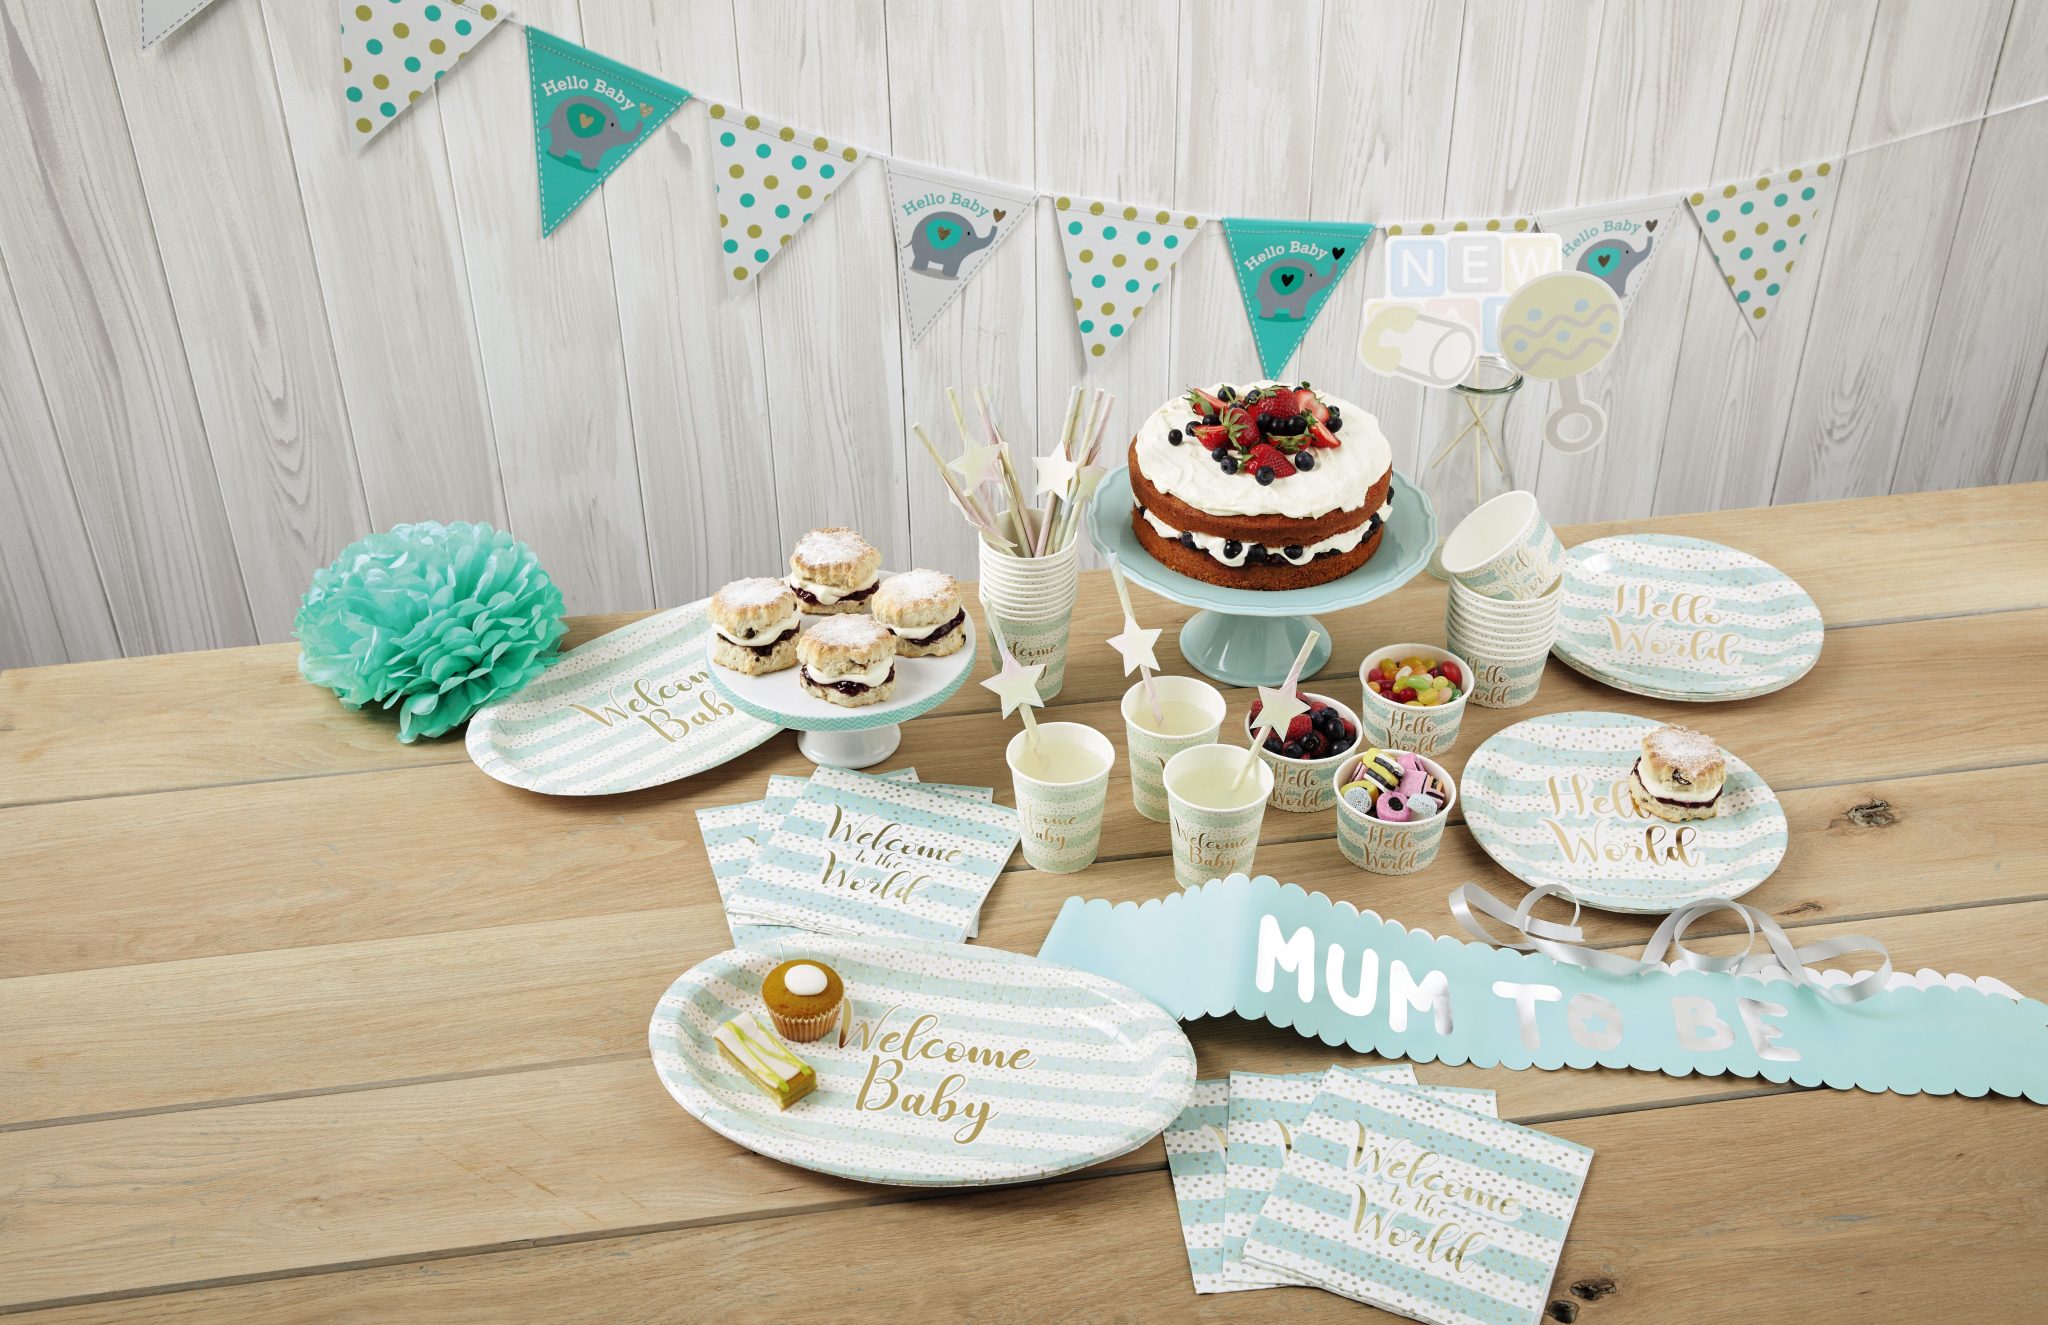 Aldi are bringing out a range of baby shower decorations starting at just 79c!